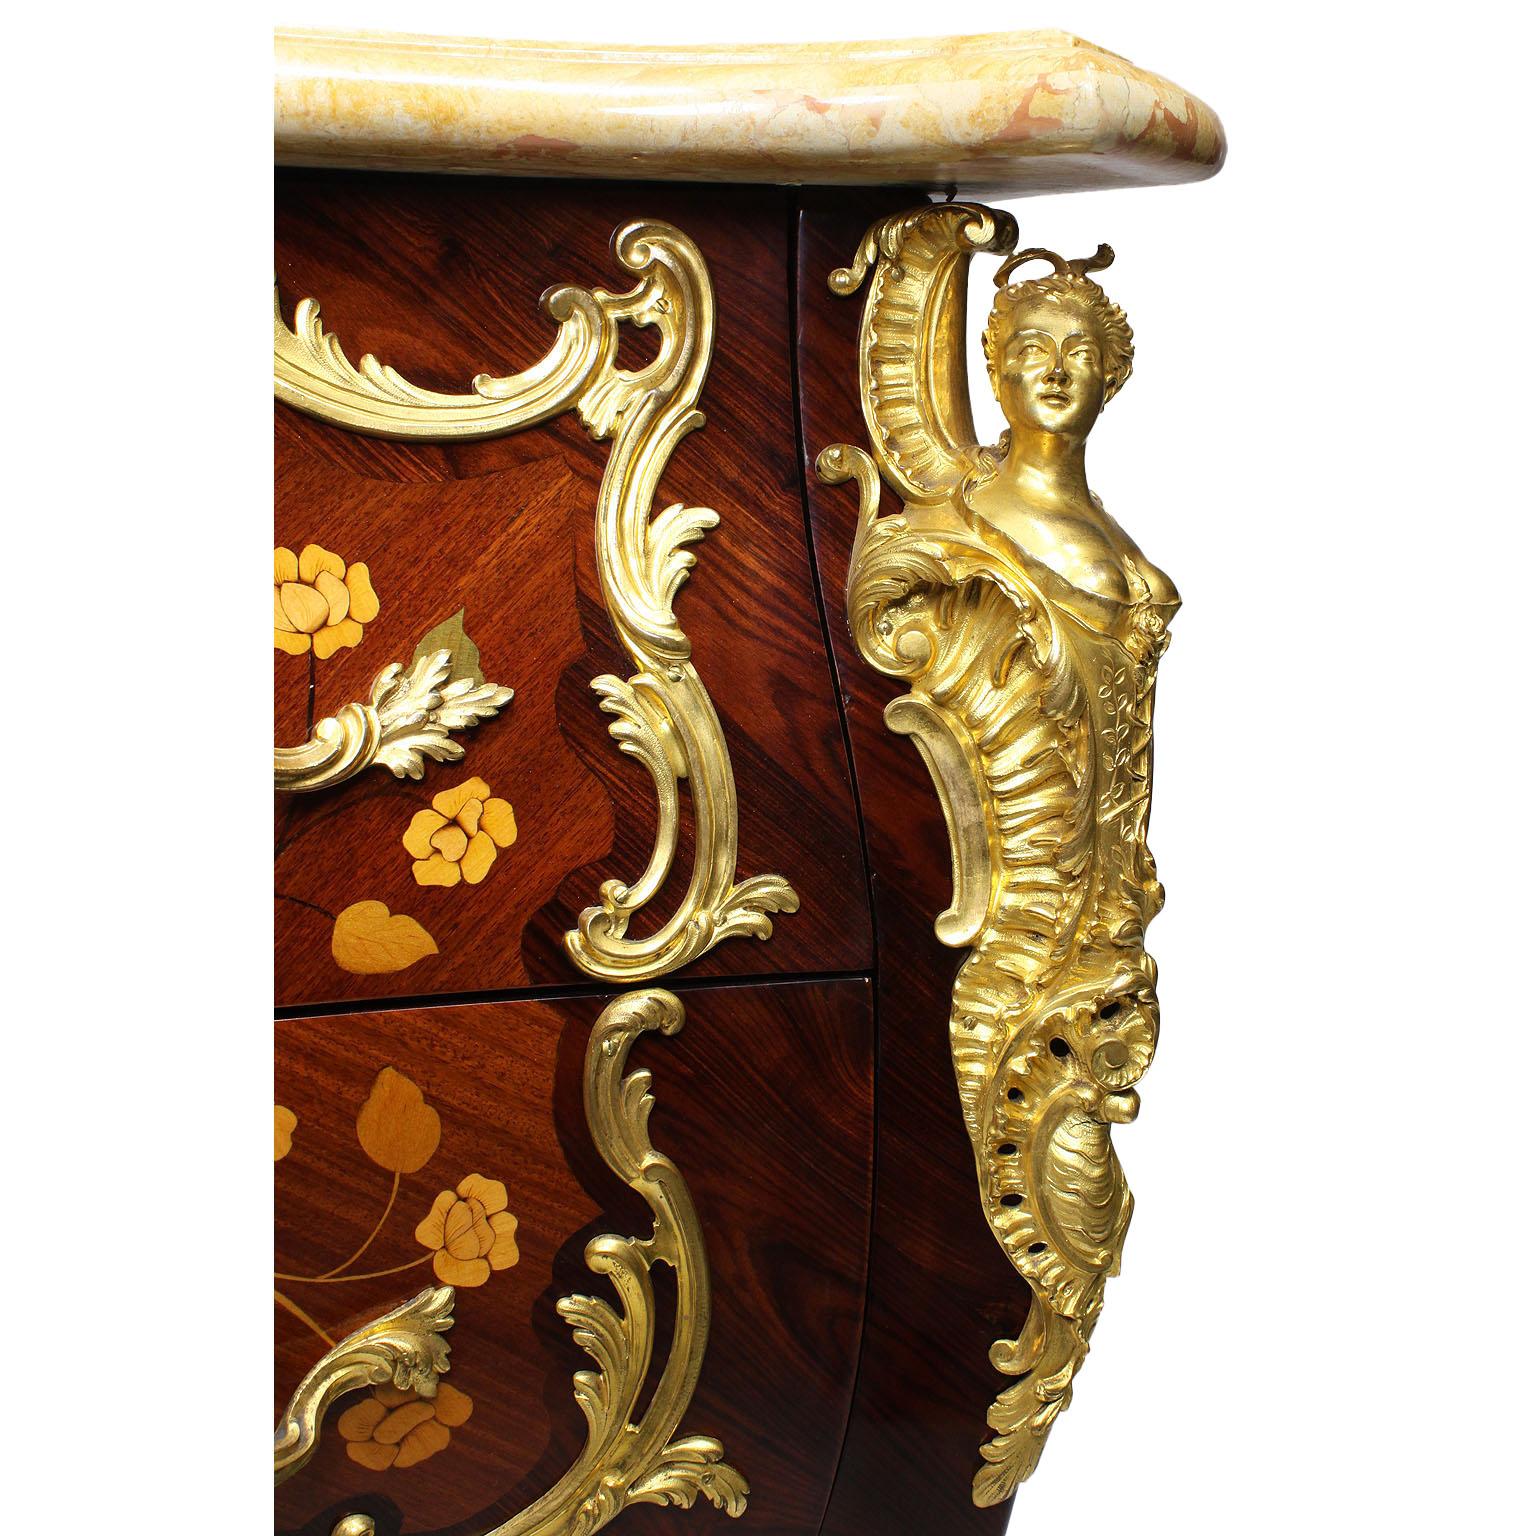 French 19th Century Louis XV Style Gilt Bronze-Mounted Marquetry Commodes, Pair For Sale 7